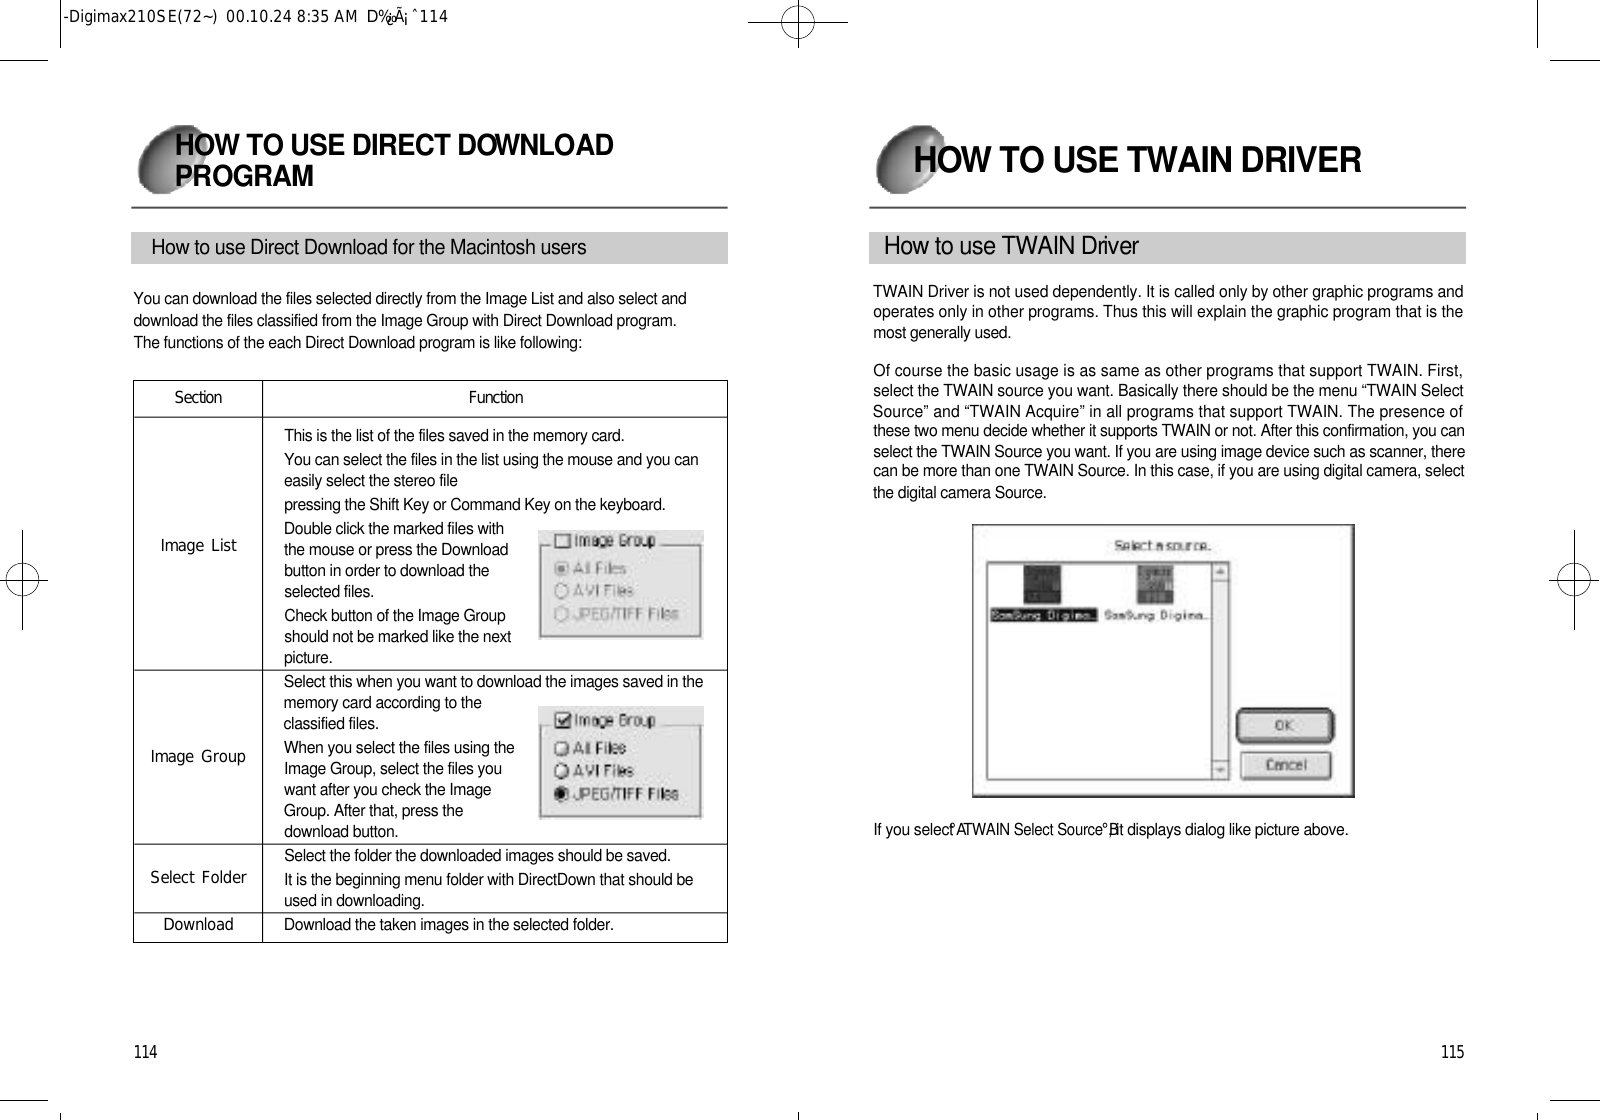 1 1 5H OW TO USE TWAIN DRIVER1 1 4H OW TO USE DIRECT DOW N L OA DP RO G R A MHow to use Direct Download for the Macintosh usersYou can download the files selected directly from the Image List and also select anddownload the files classified from the Image Group with Direct Download program.The functions of the each Direct Download program is like following:This is the list of the files saved in the memory card.You can select the files in the list using the mouse and you caneasily select the stereo filepressing the Shift Key or Command Key on the keyboard.Double click the marked files withthe mouse or press the Downloadbutton in order to download theselected files.Check button of the Image Groupshould not be marked like the nextp i c t u r e .Select this when you want to download the images saved in thememory card according to theclassified files.When you select the files using theImage Group, select the files youwant after you check the ImageGroup. After that, press thedownload button.Select the folder the downloaded images should be saved. It is the beginning menu folder with DirectDown that should beused in downloading.Download the taken images in the selected folder.S e c t i o nImage ListImage GroupSelect FolderDownloadF u n c t i o nH o w to use TWAIN Dri ve rTWAIN Driver is not used dependently. It is called only by other graphic programs andoperates only in other programs. Thus this will explain the graphic program that is themost generally used. Of course the basic usage is as same as other programs that support TWAIN. First,select the TWAIN source you want. Basically there should be the menu “TWAIN SelectSource” and “TWAIN Acquire” in all programs that support TWAIN. The presence ofthese two menu decide whether it supports TWAIN or not. After this confirmation, you canselect the TWAIN Source you want. If you are using image device such as scanner, therecan be more than one TWAIN Source. In this case, if you are using digital camera, selectthe digital camera Source.If you select °ATWAIN Select Source°B, it displays dialog like picture above.-Digimax210SE(72~)  00.10.24 8:35 AM  D‰¿Ã¡ˆ114